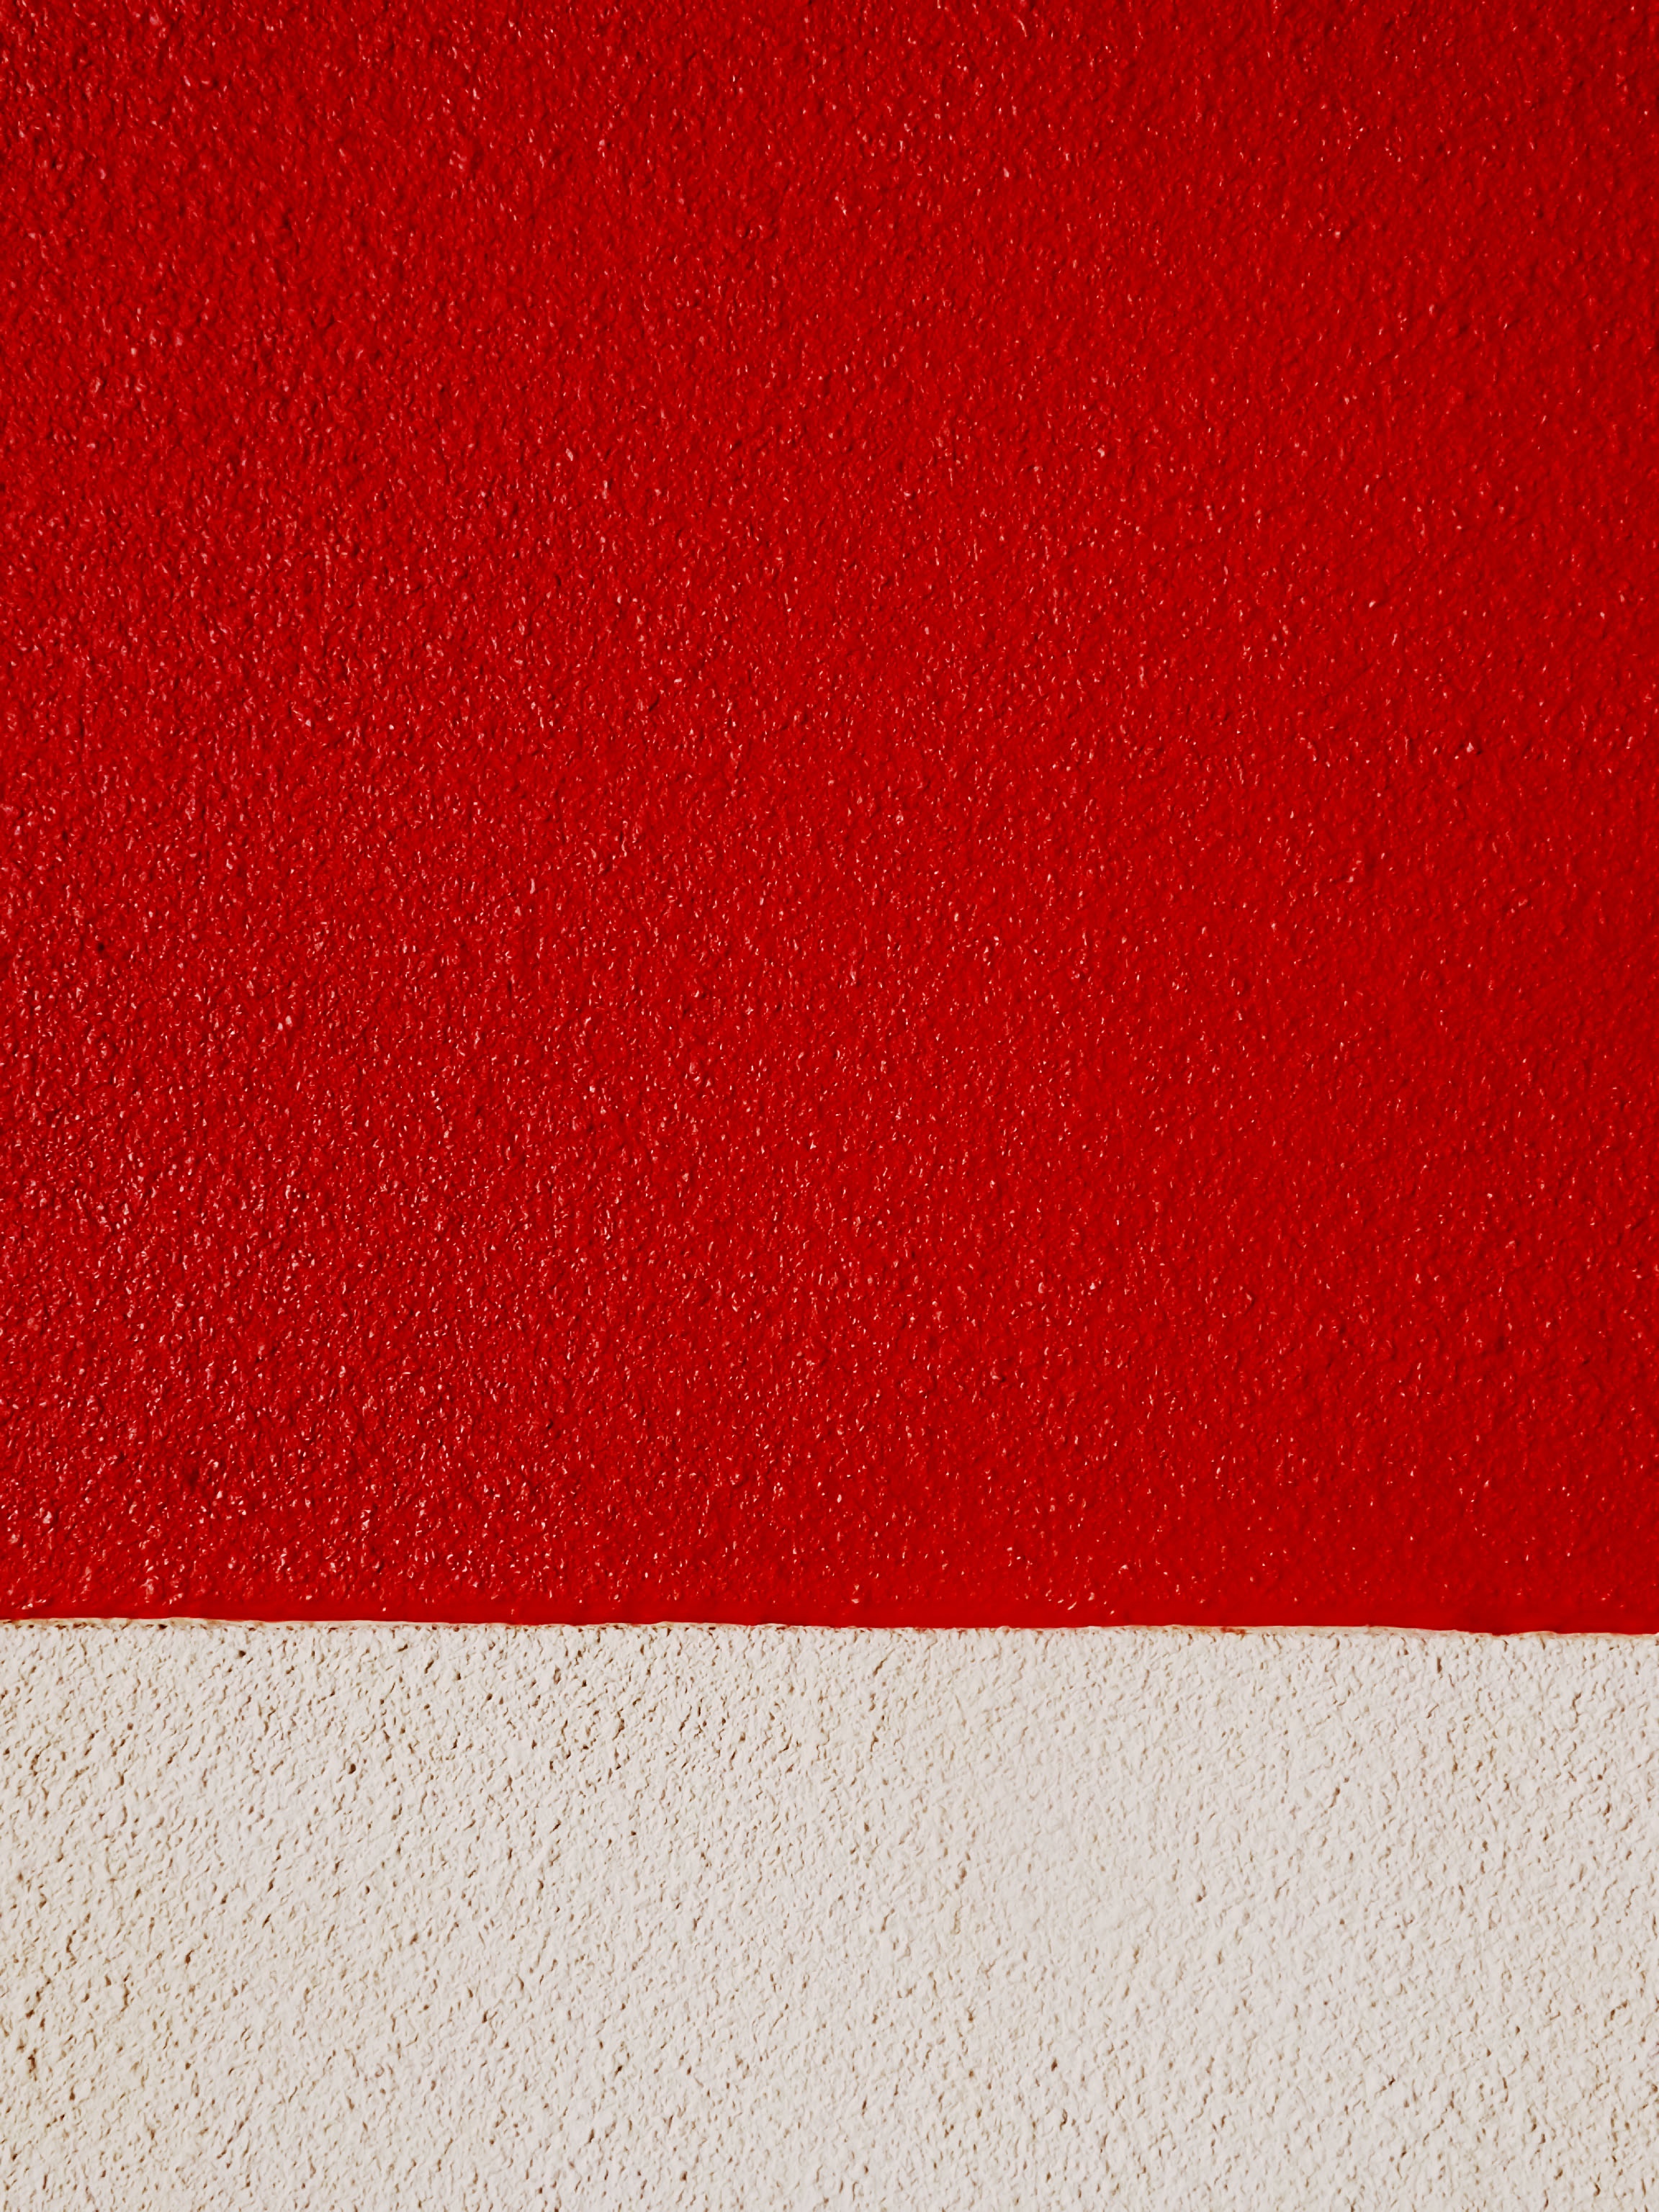 Full HD texture, paint, red, textures, wall, rough